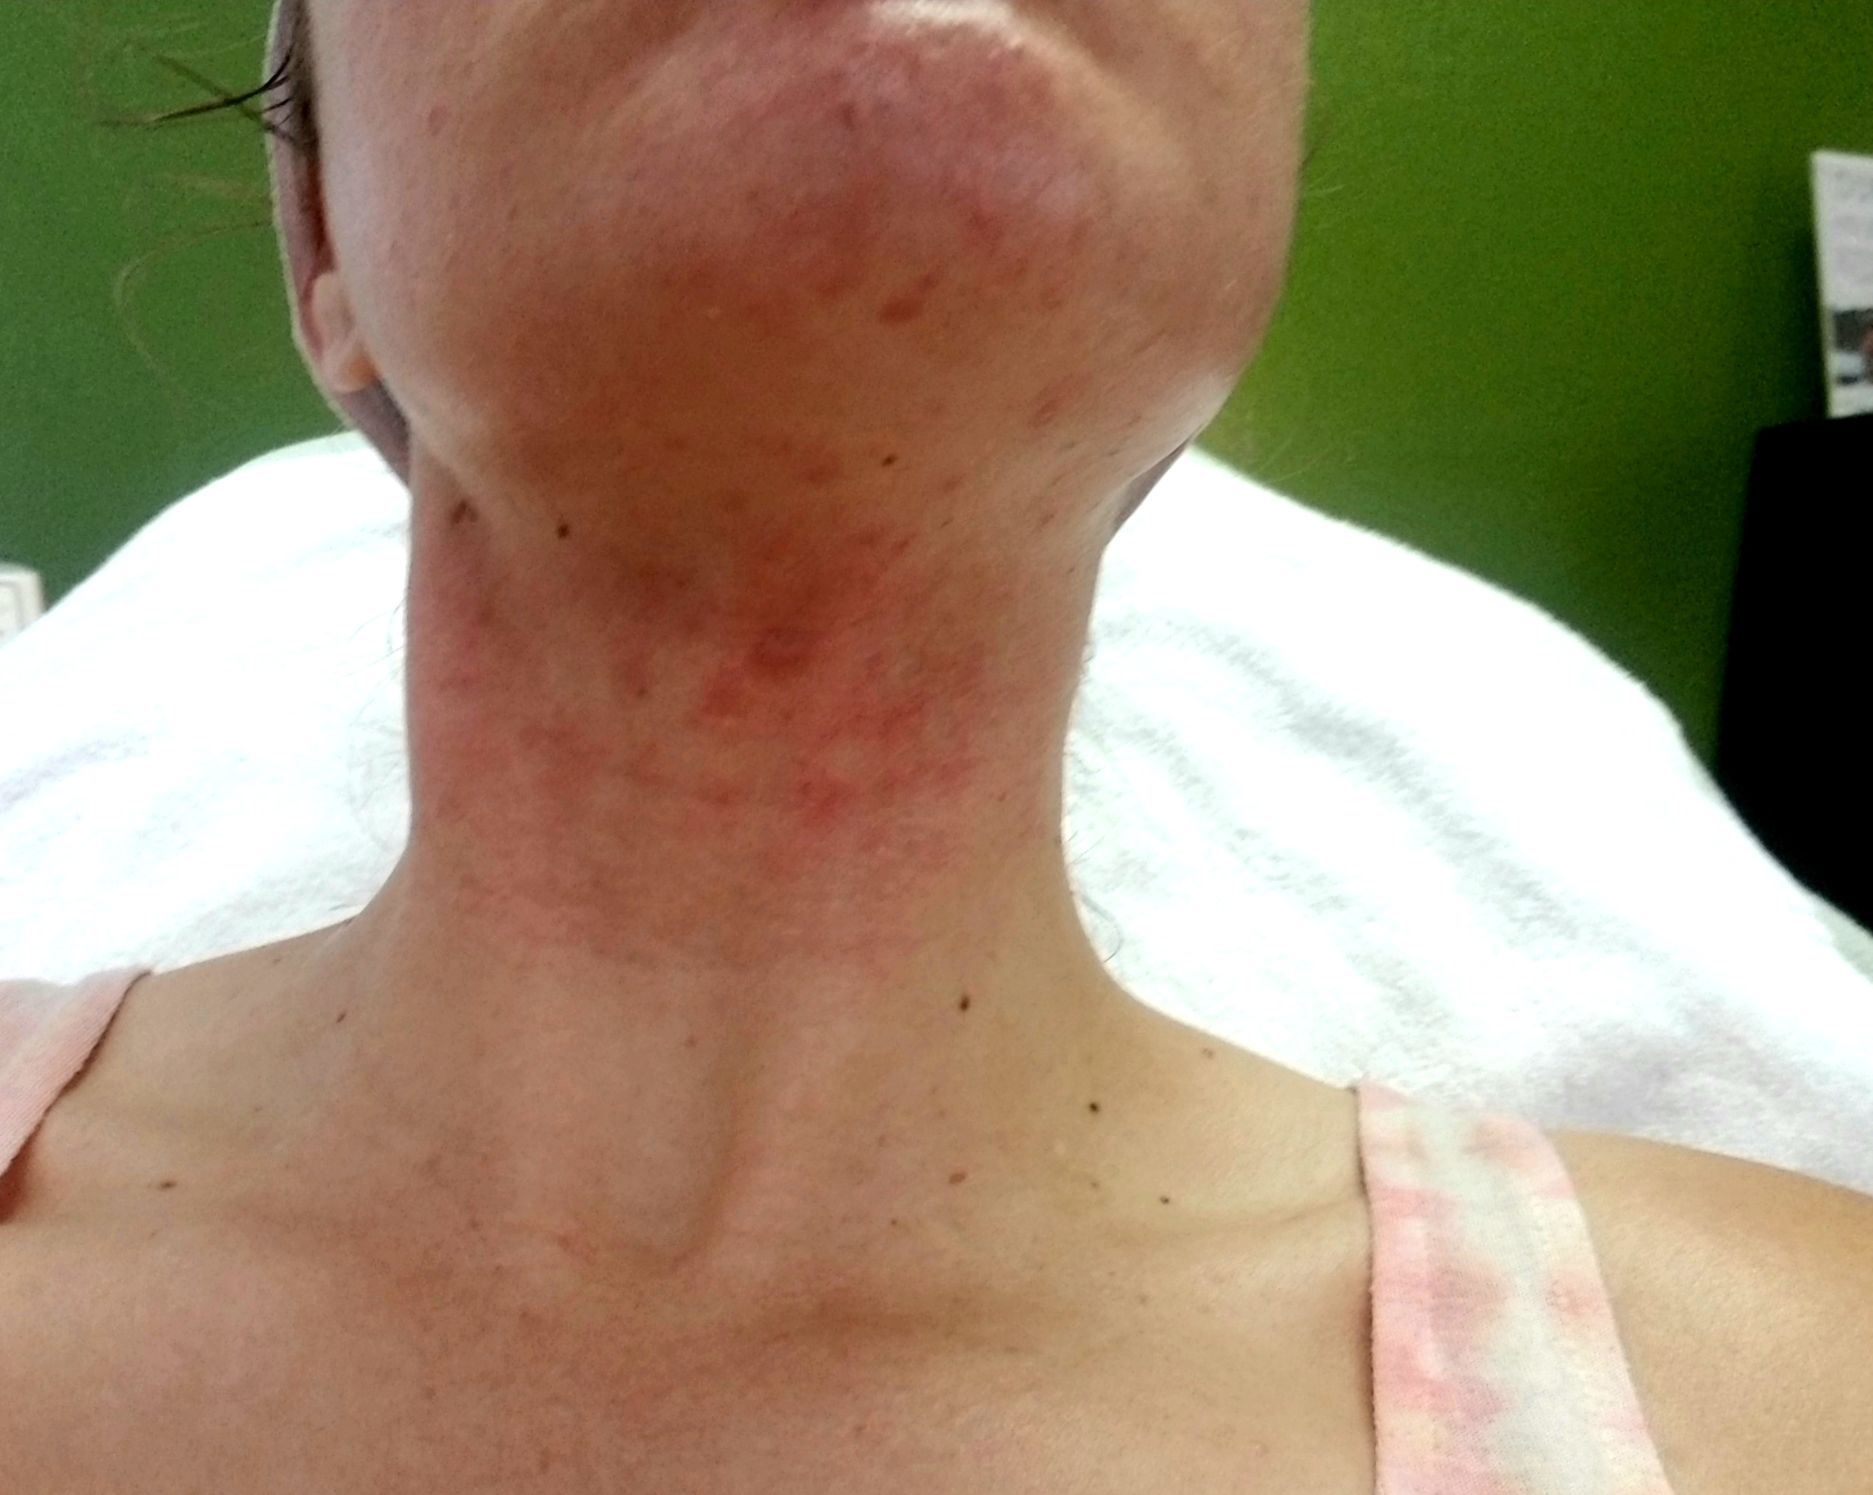 Sumer with acne on her neck